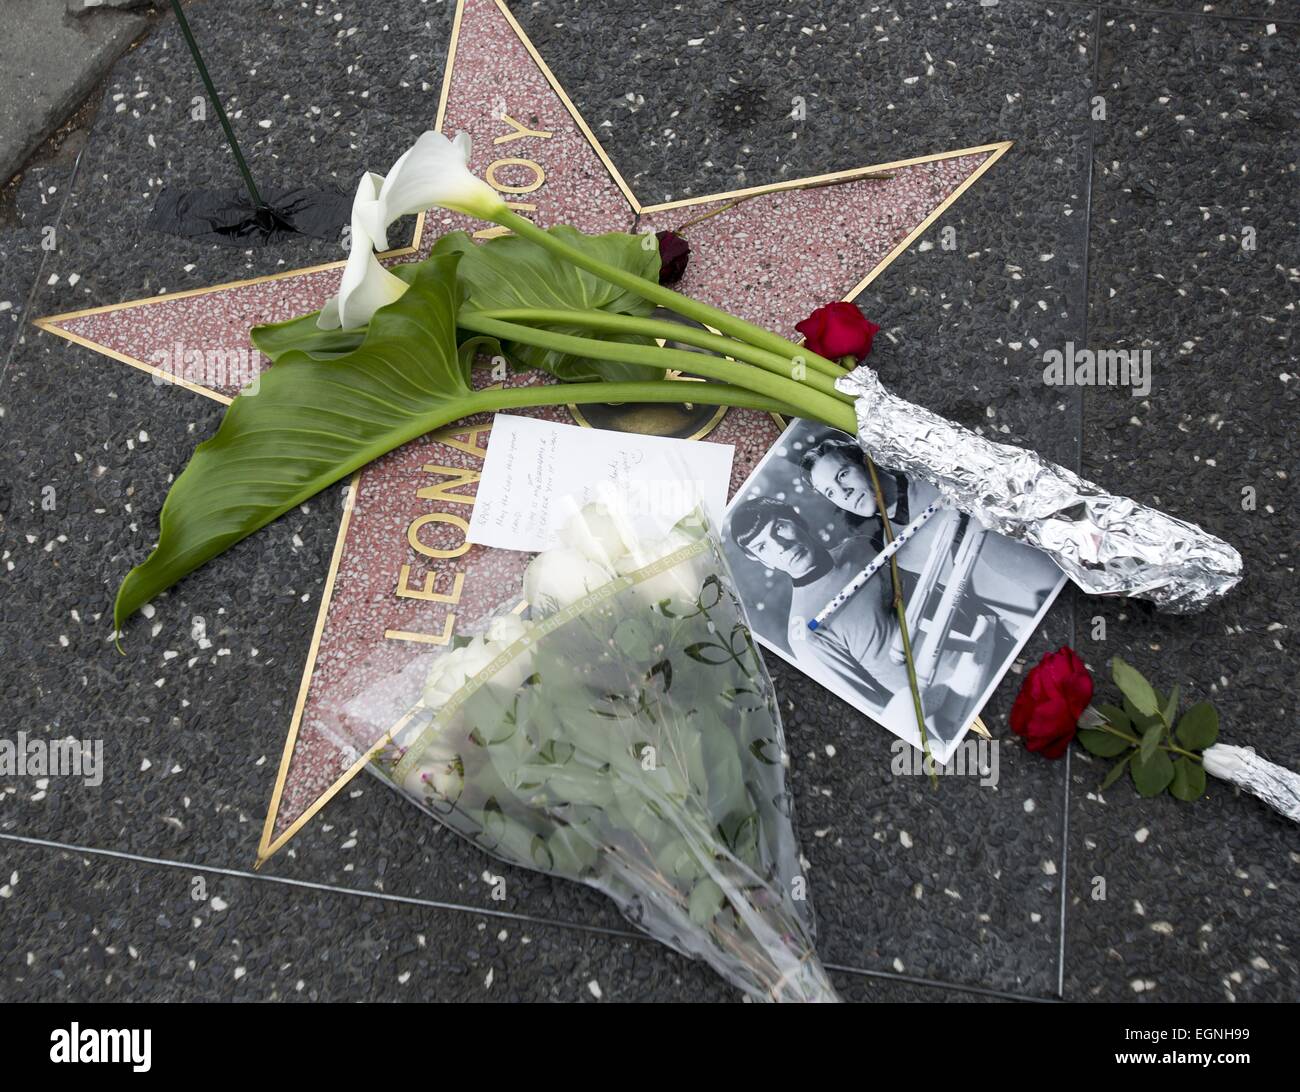 Los Angeles, California, USA. 27th Feb, 2015. People pay their respects with flowers and photographs at the Hollywood Walk of Fame star of Leonard Nimoy. Nimoy, famous for playing Mr. Spock in 'Star Trek' died Friday of end-stage chronic obstructive pulmonary disease. He was 83. © Ringo Chiu/ZUMA Wire/Alamy Live News Stock Photo